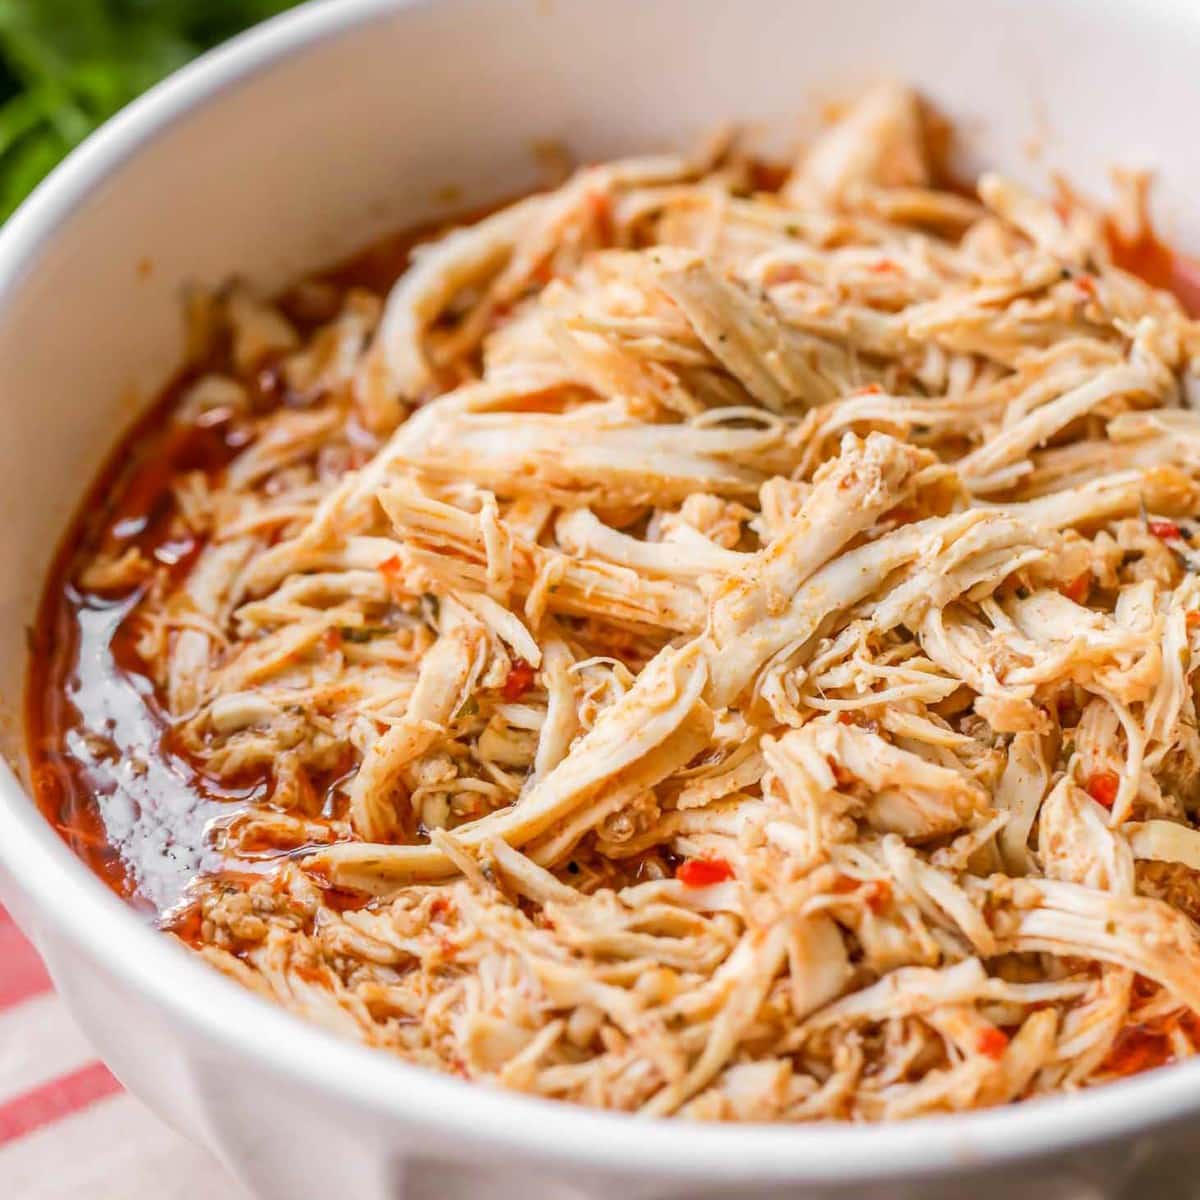 5 Ingredient Recipes - Cafe rio shredded chicken served in a white bowl.